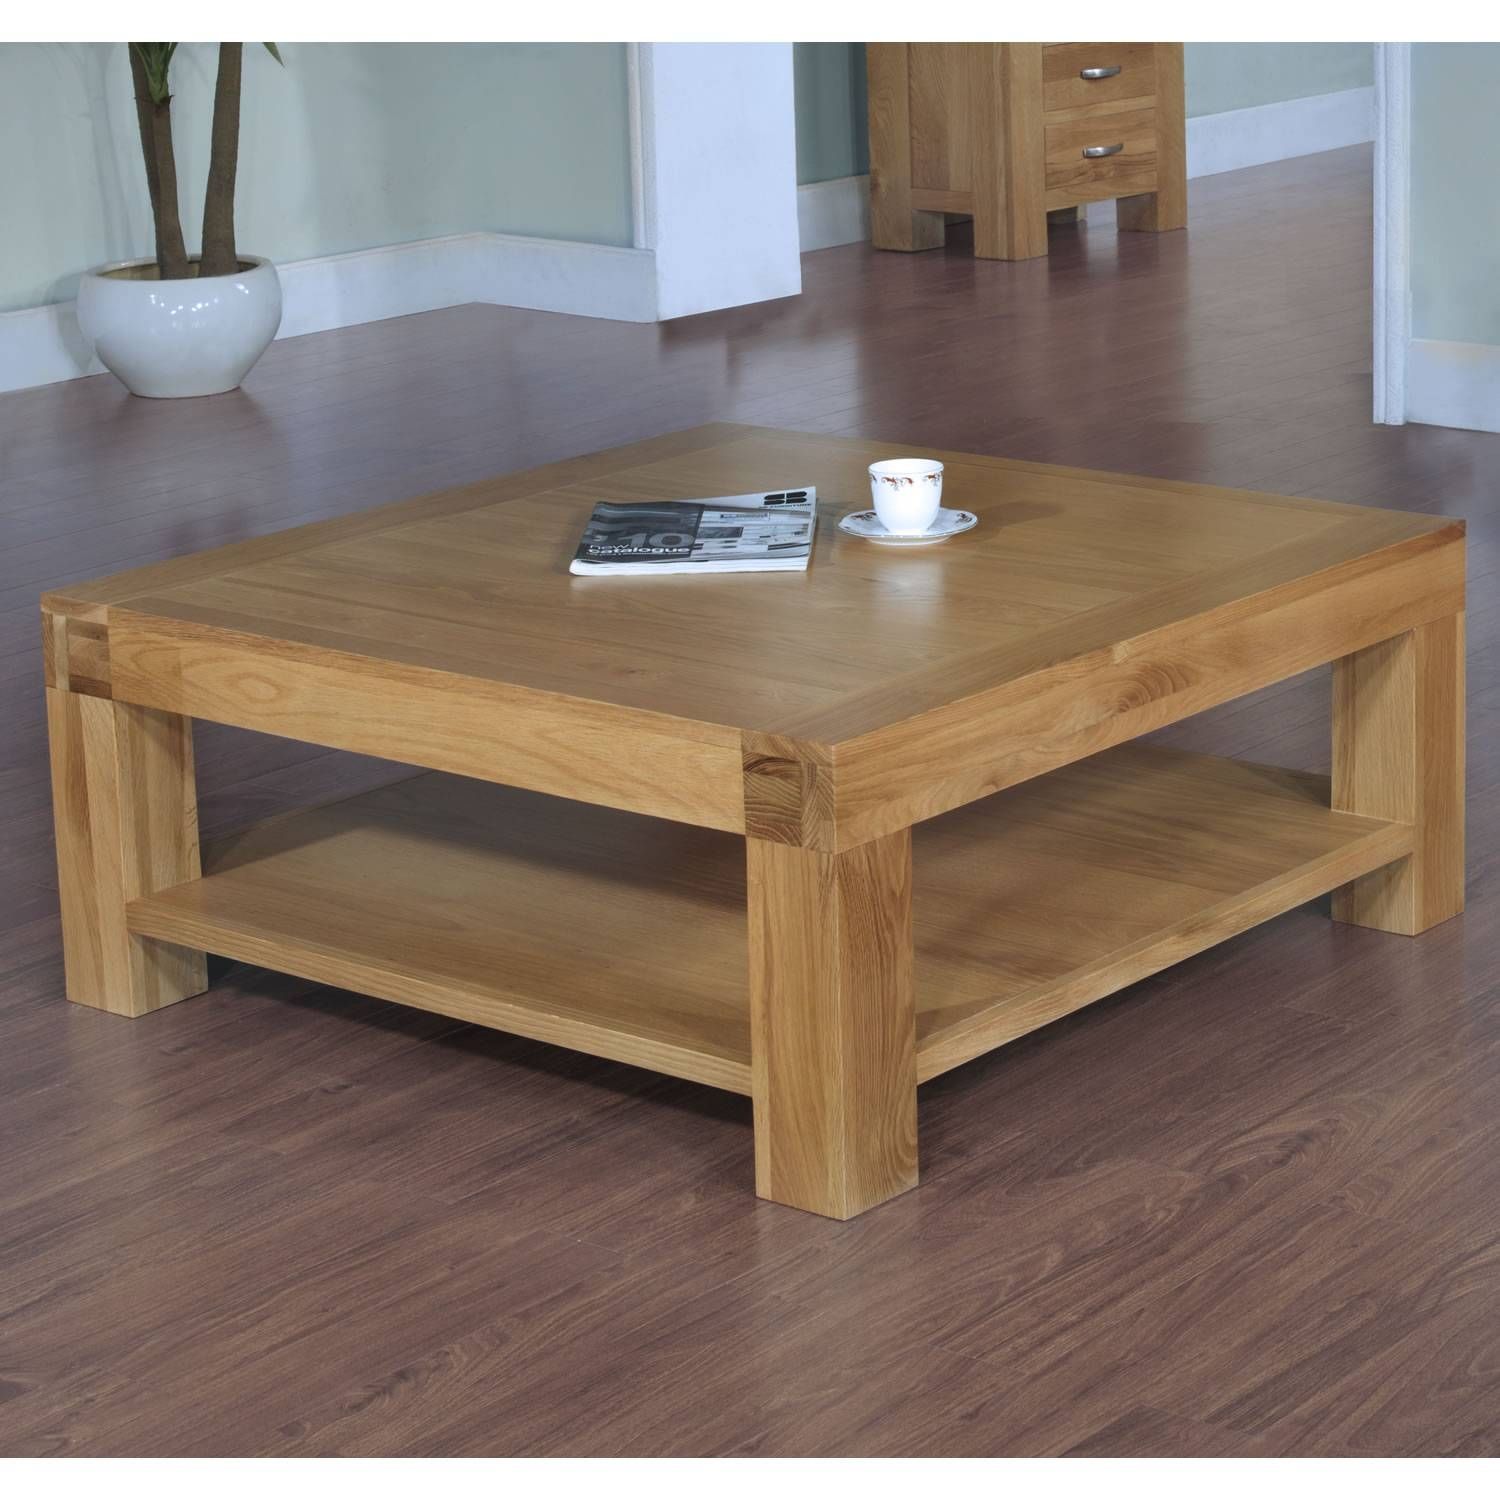 Coffee Table: Extraordinary Square Rustic Coffee Table Design Pertaining To Square Wood Coffee Tables With Storage (View 6 of 30)